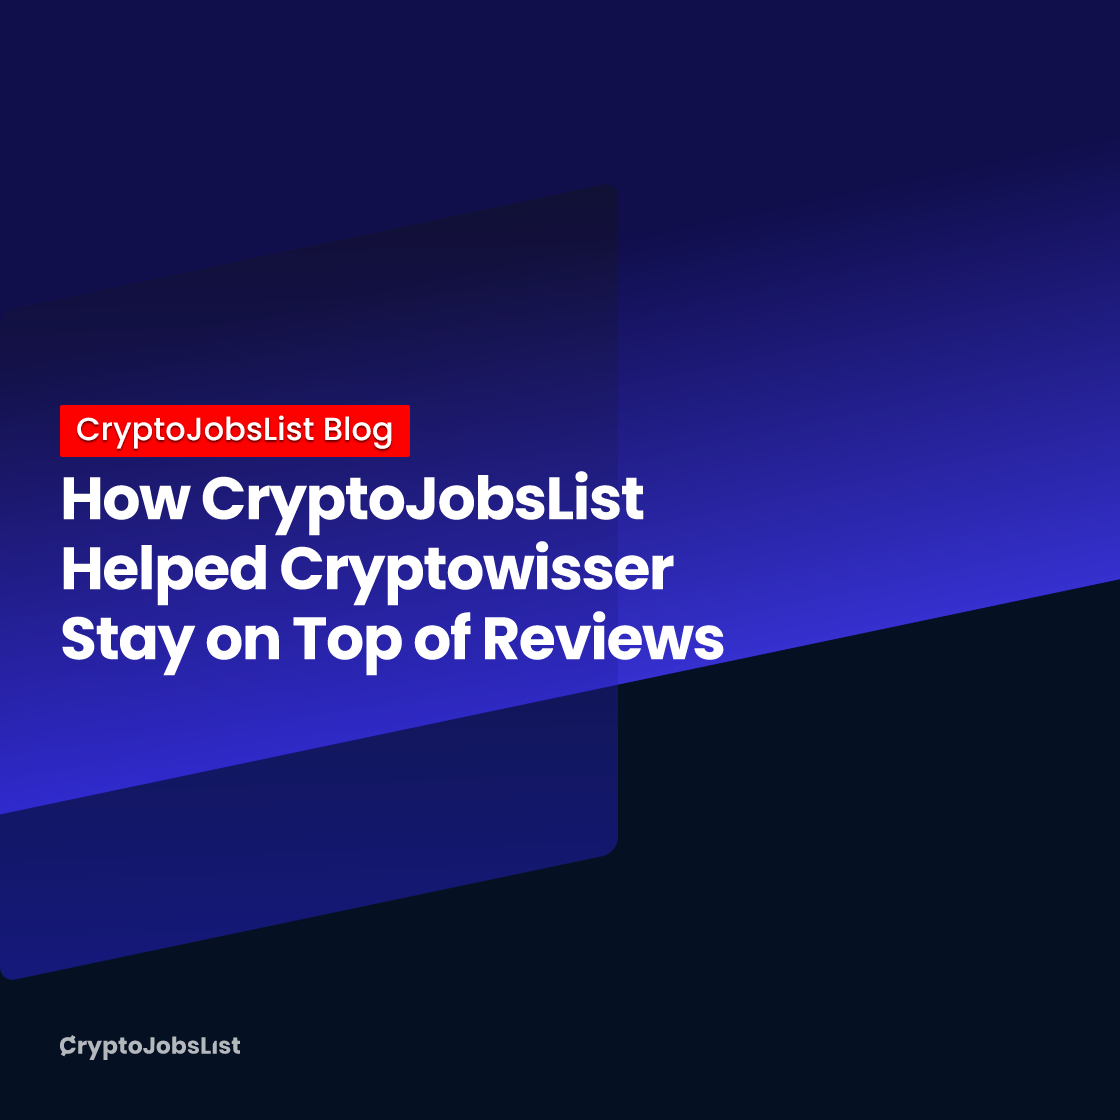 How CryptoJobsList Helped Cryptowisser Stay on Top of Reviews